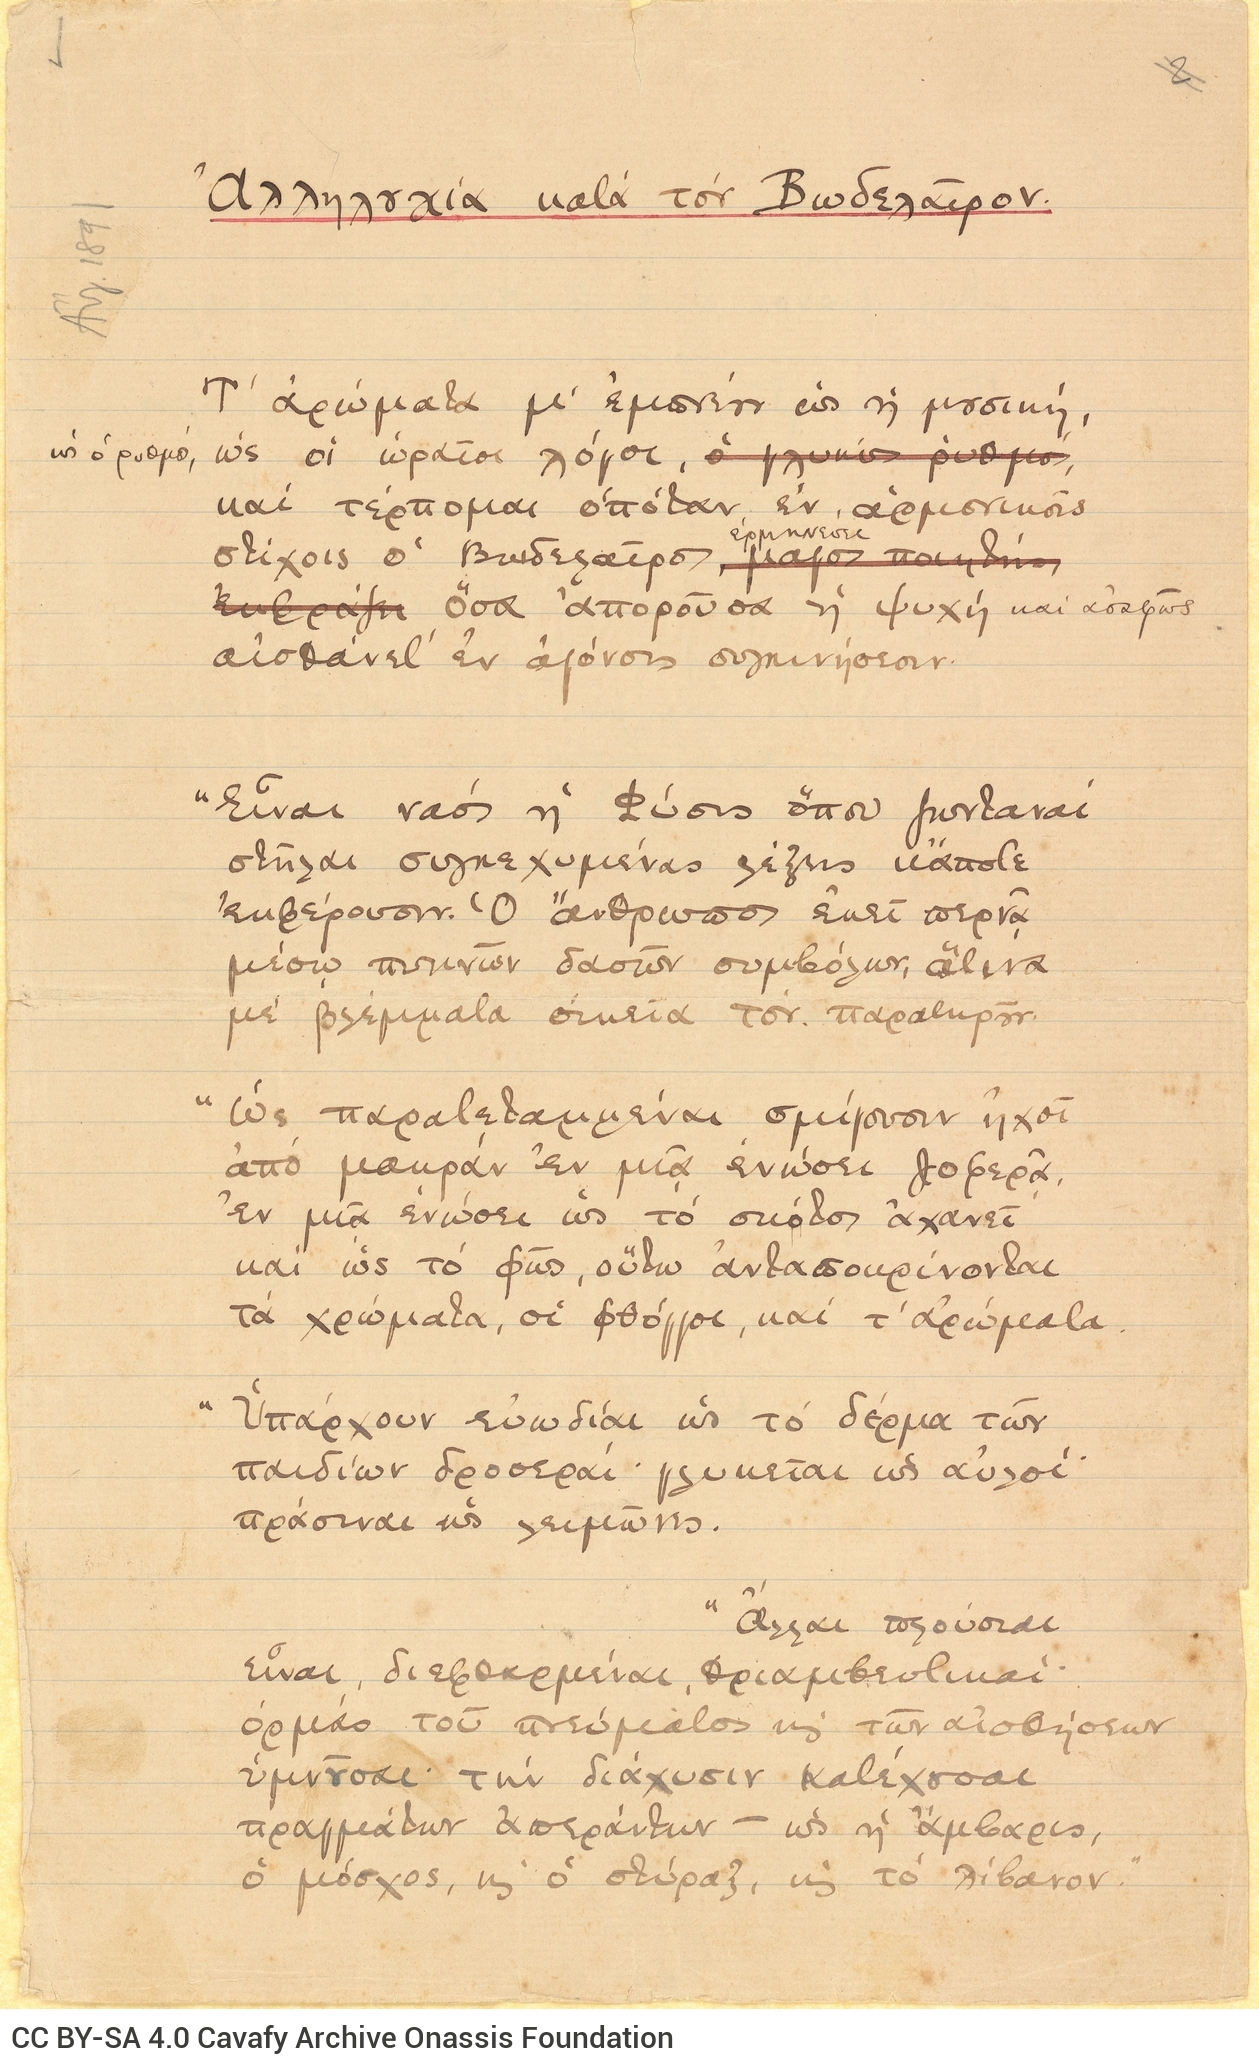 Manuscript of the poem "Correspondences According to Baudelaire" on both sides of a ruled sheet. Cancellations and emendat